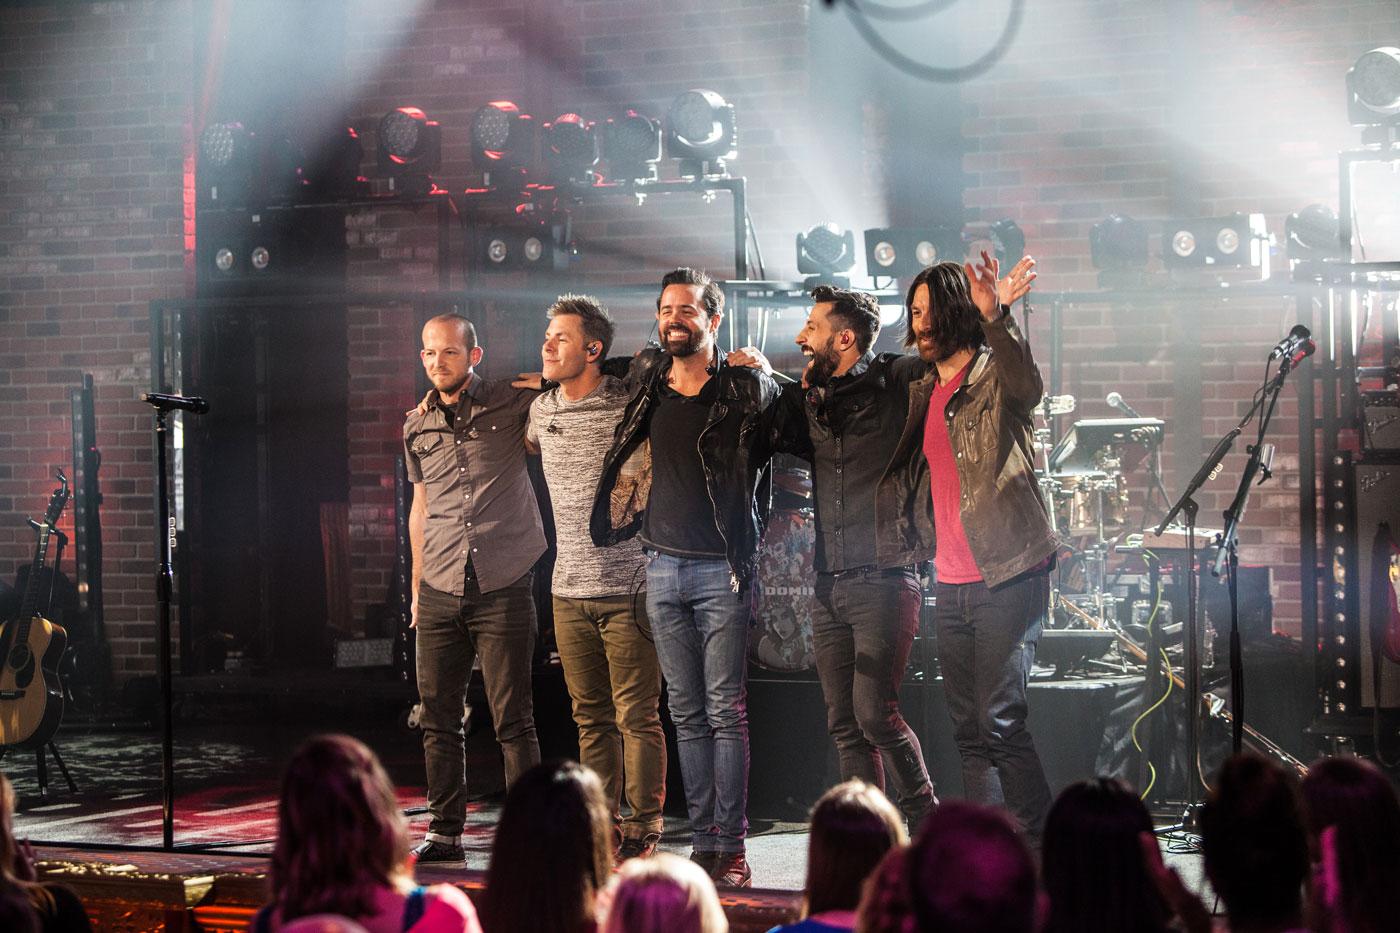 Old Dominion on Soundstage. (Courtesy of Raney Images)